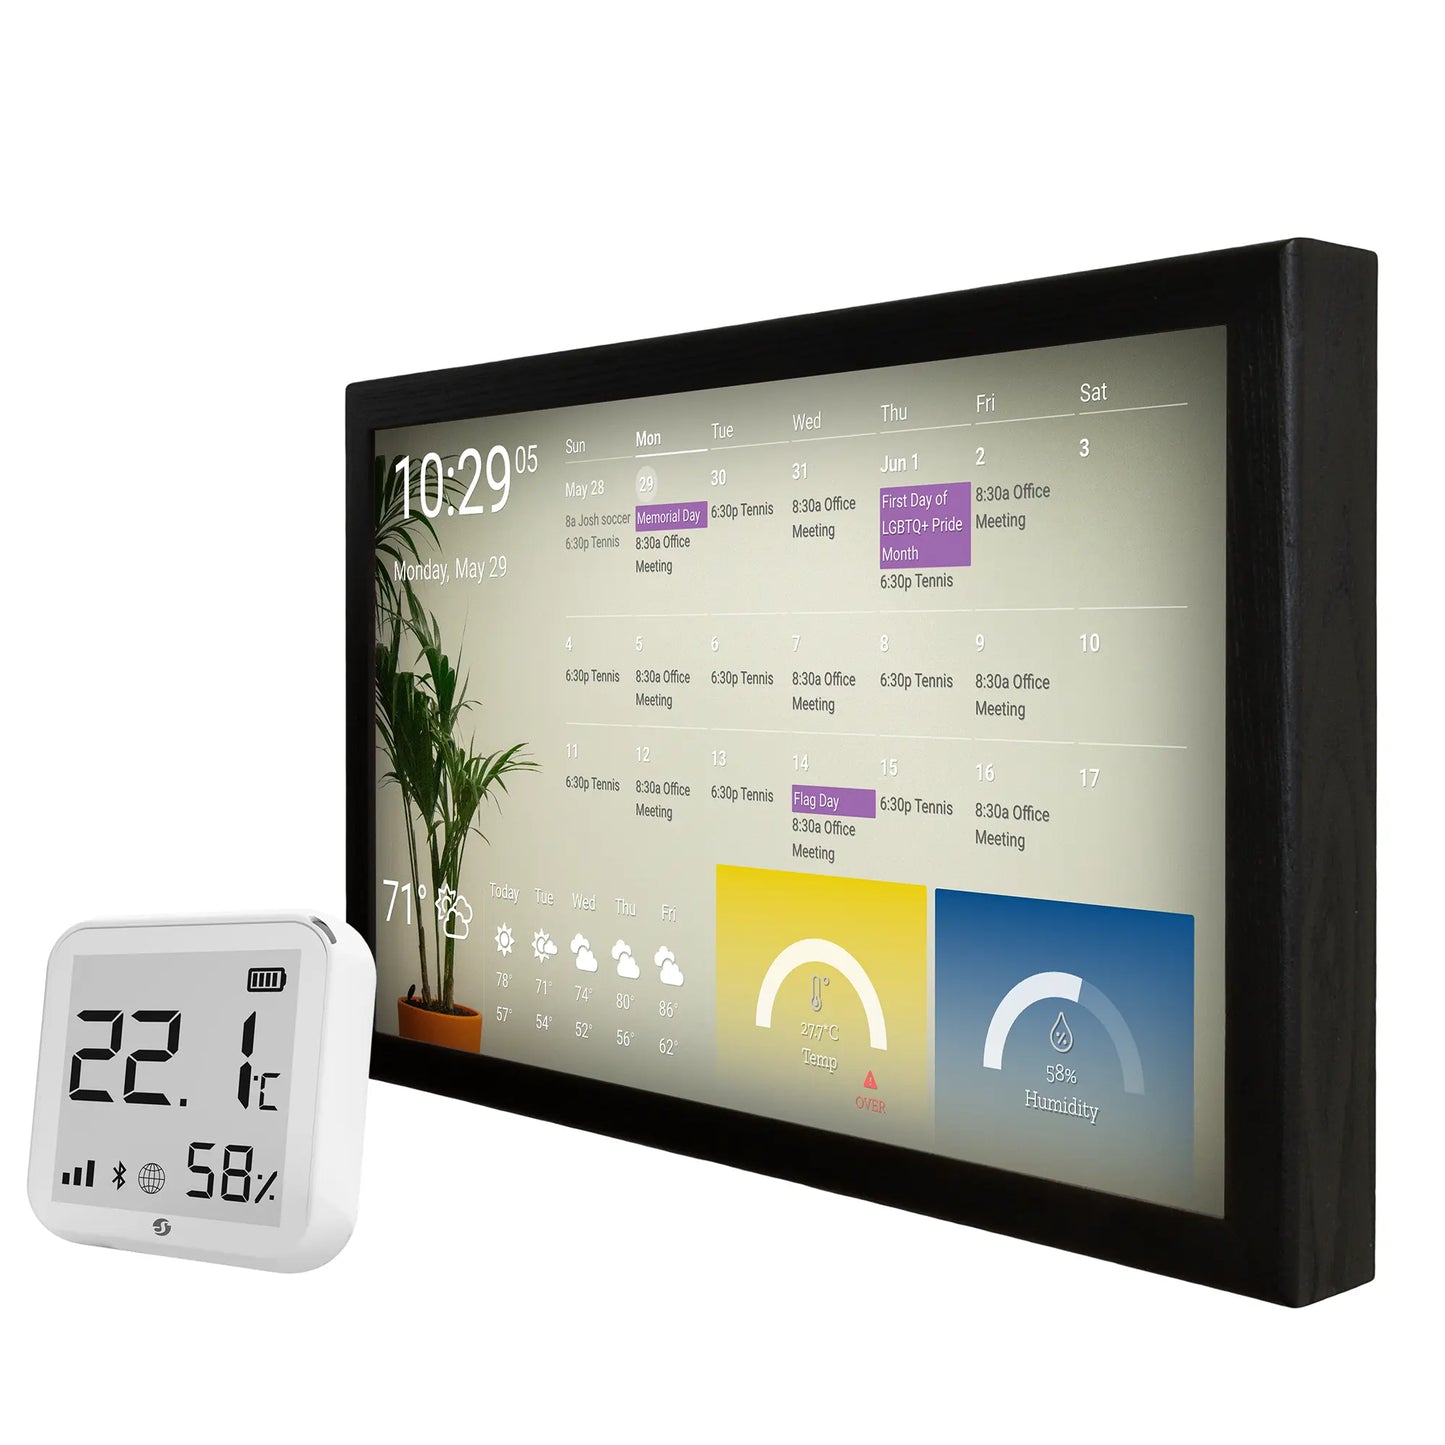 Smart Display 24 Inch with Temperature and Humidity Sensor